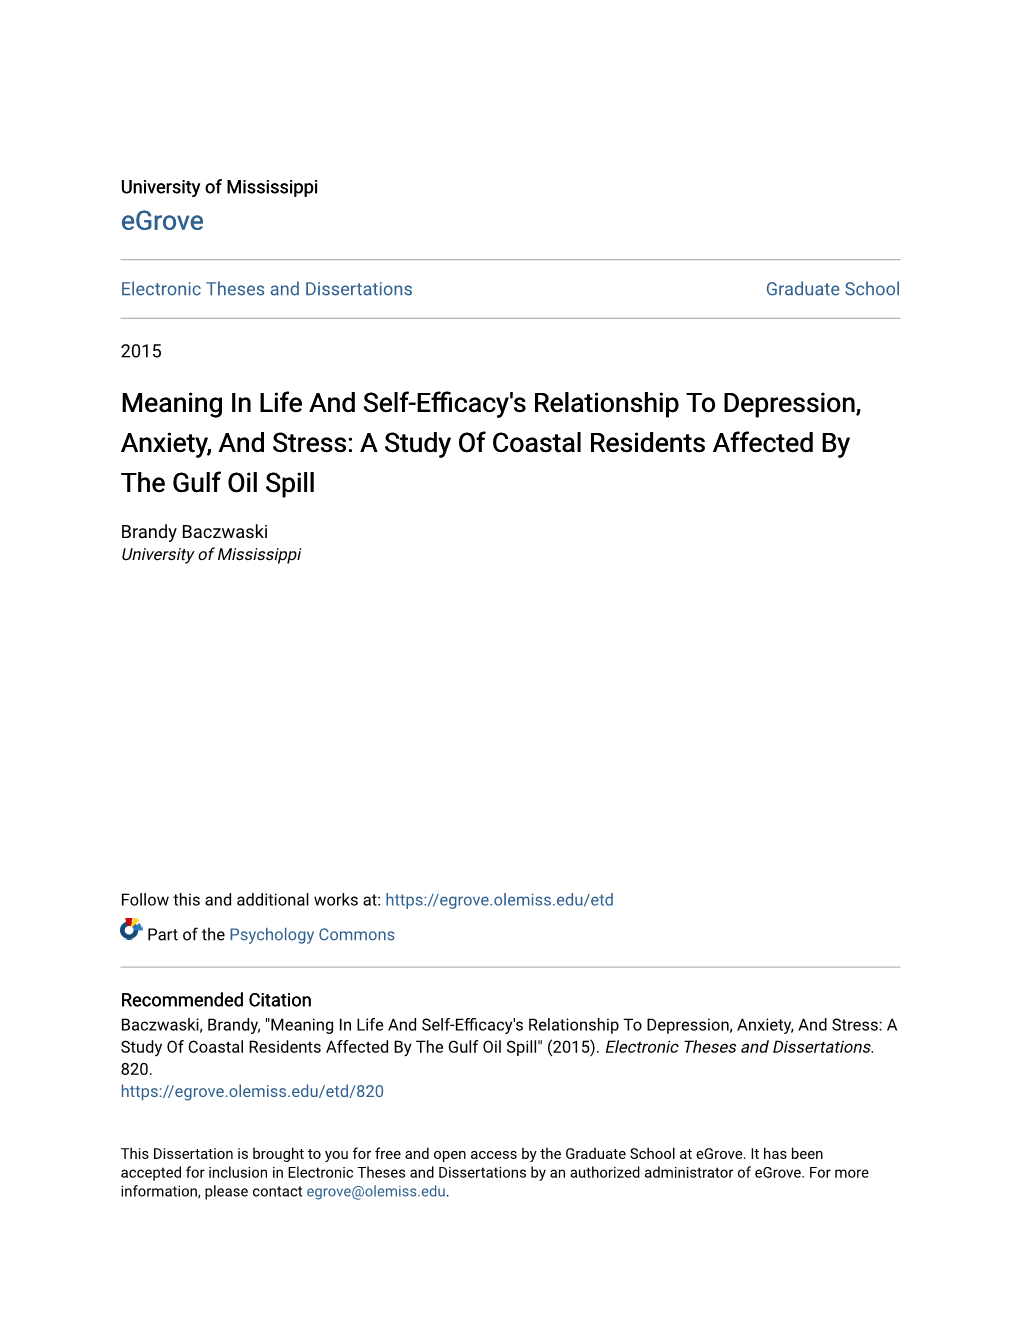 Meaning in Life and Self-Efficacy's Relationship to Depression, Anxiety, and Stress: a Study of Coastal Residents Affected by the Gulf Oil Spill